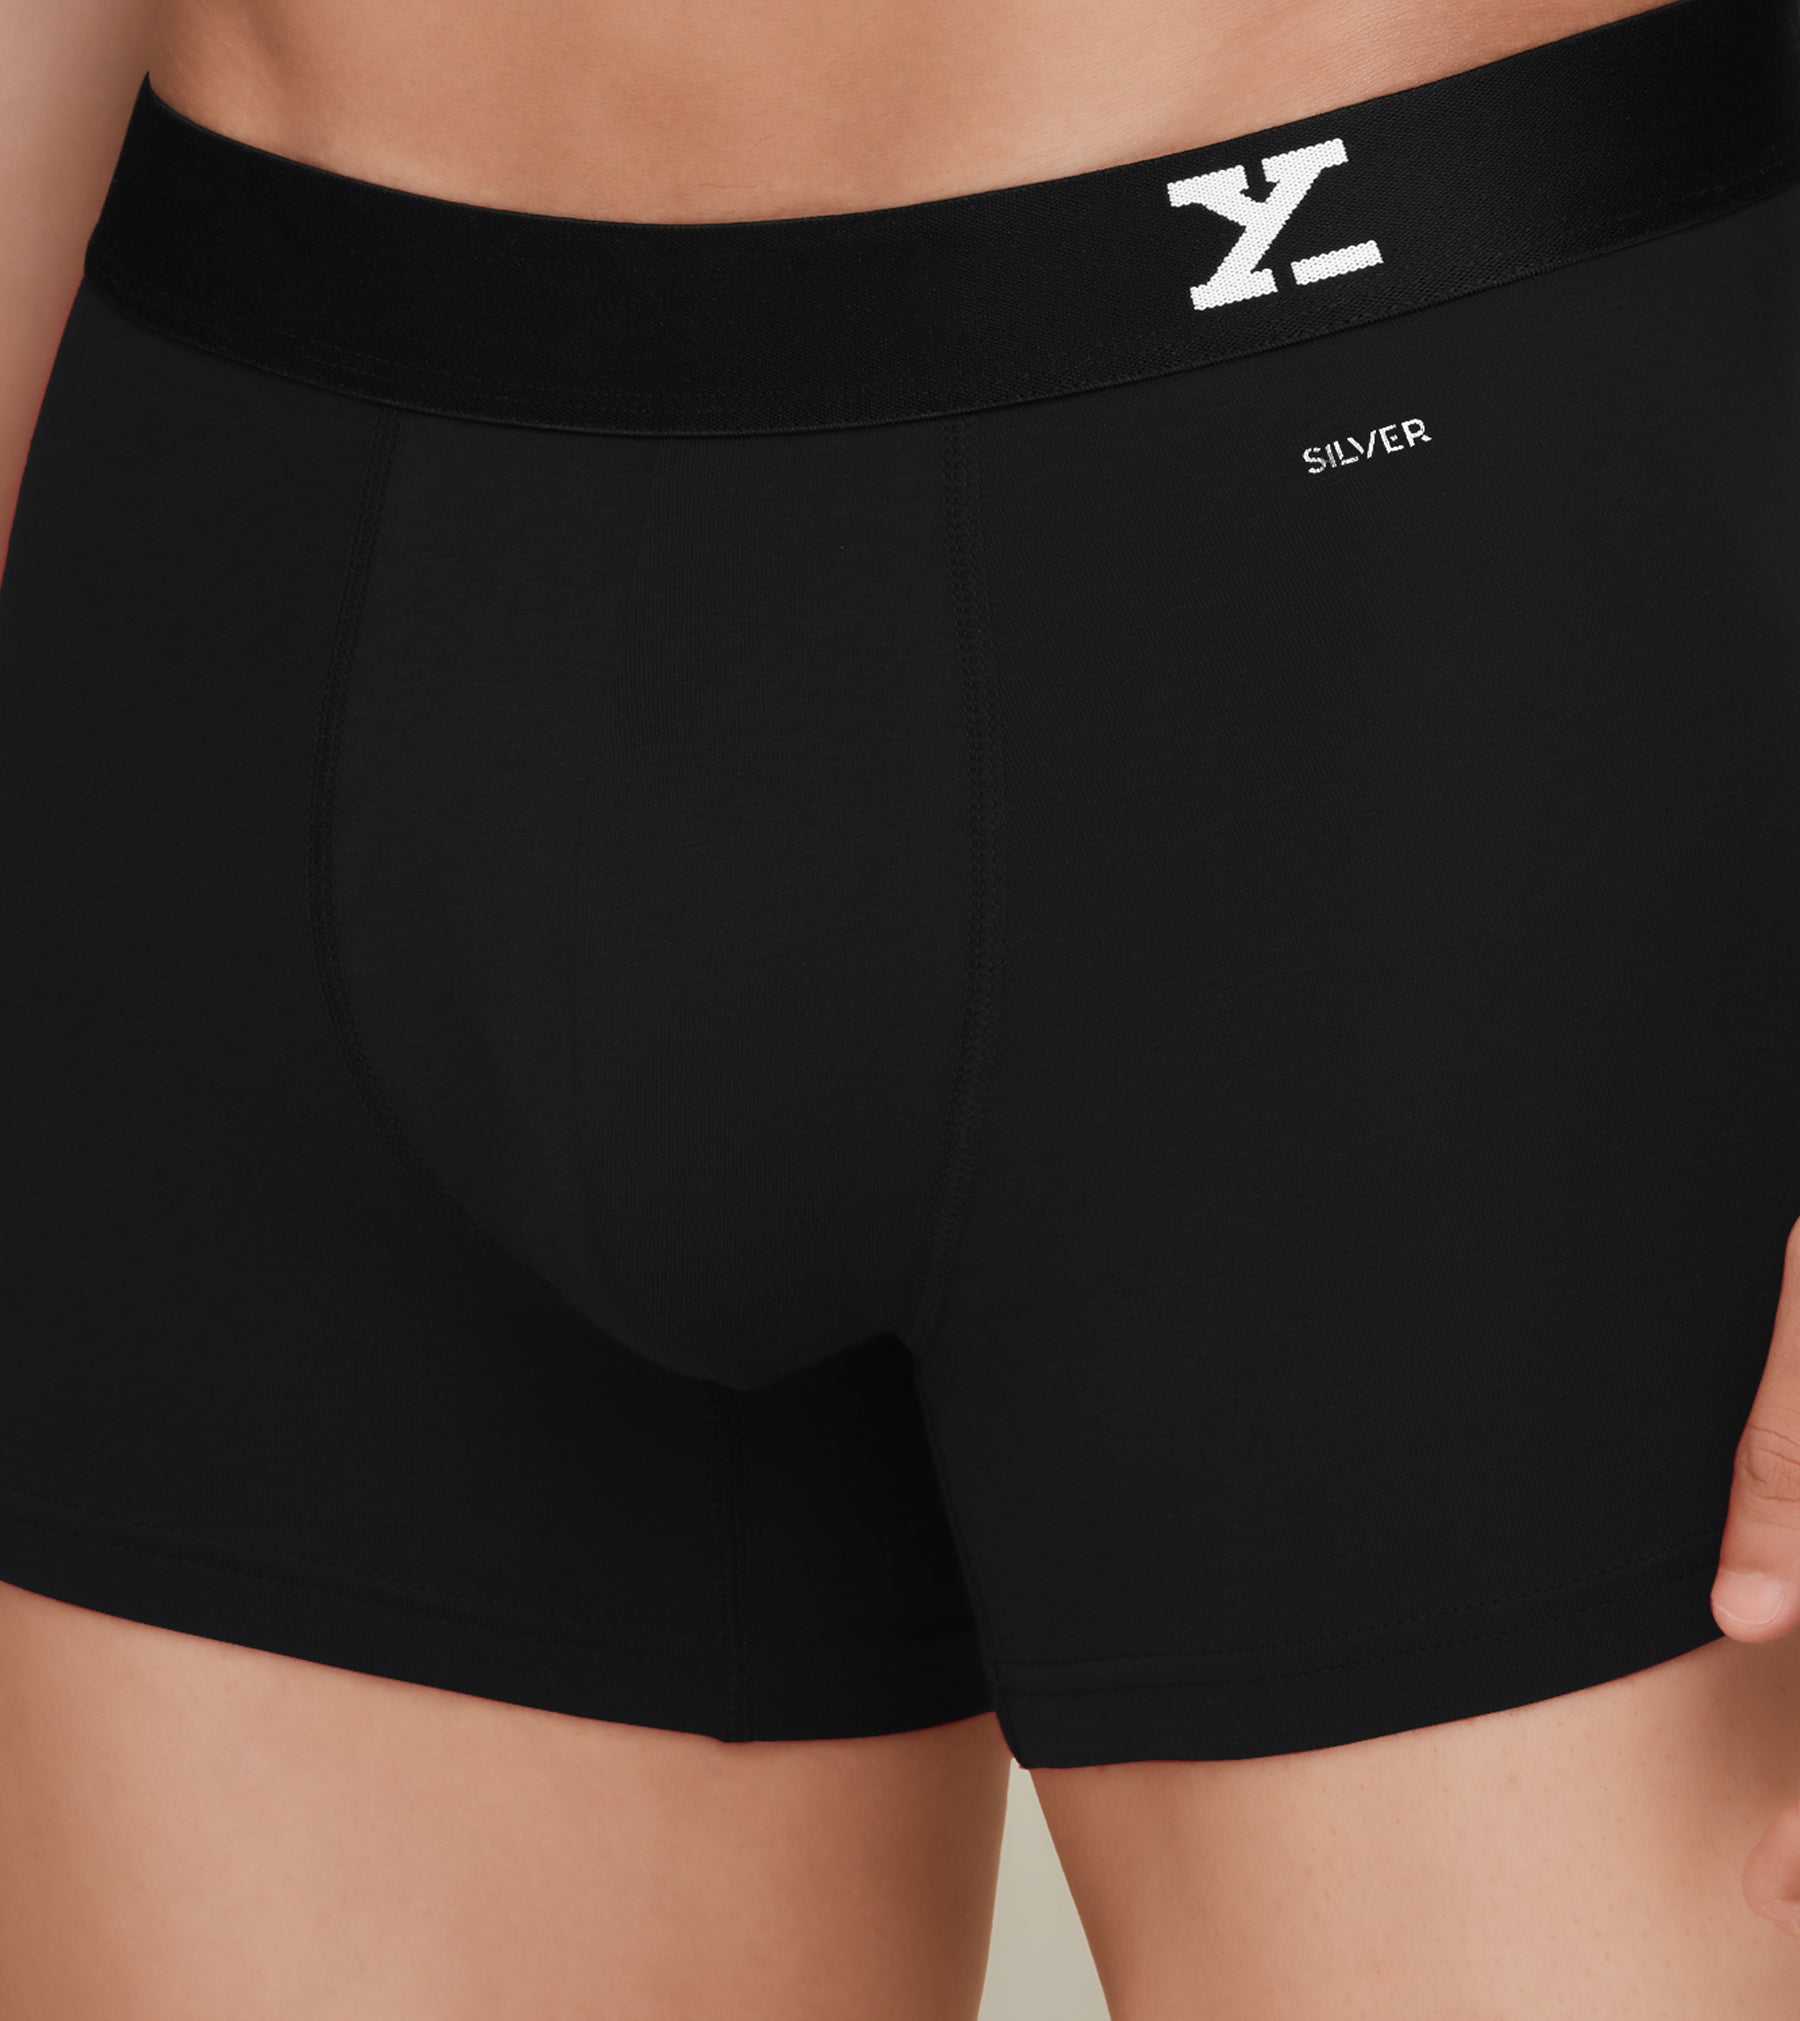 Aero Silver Cotton Trunks For Men Pack of 2(Black, Maroon) -  XYXX Mens Apparels